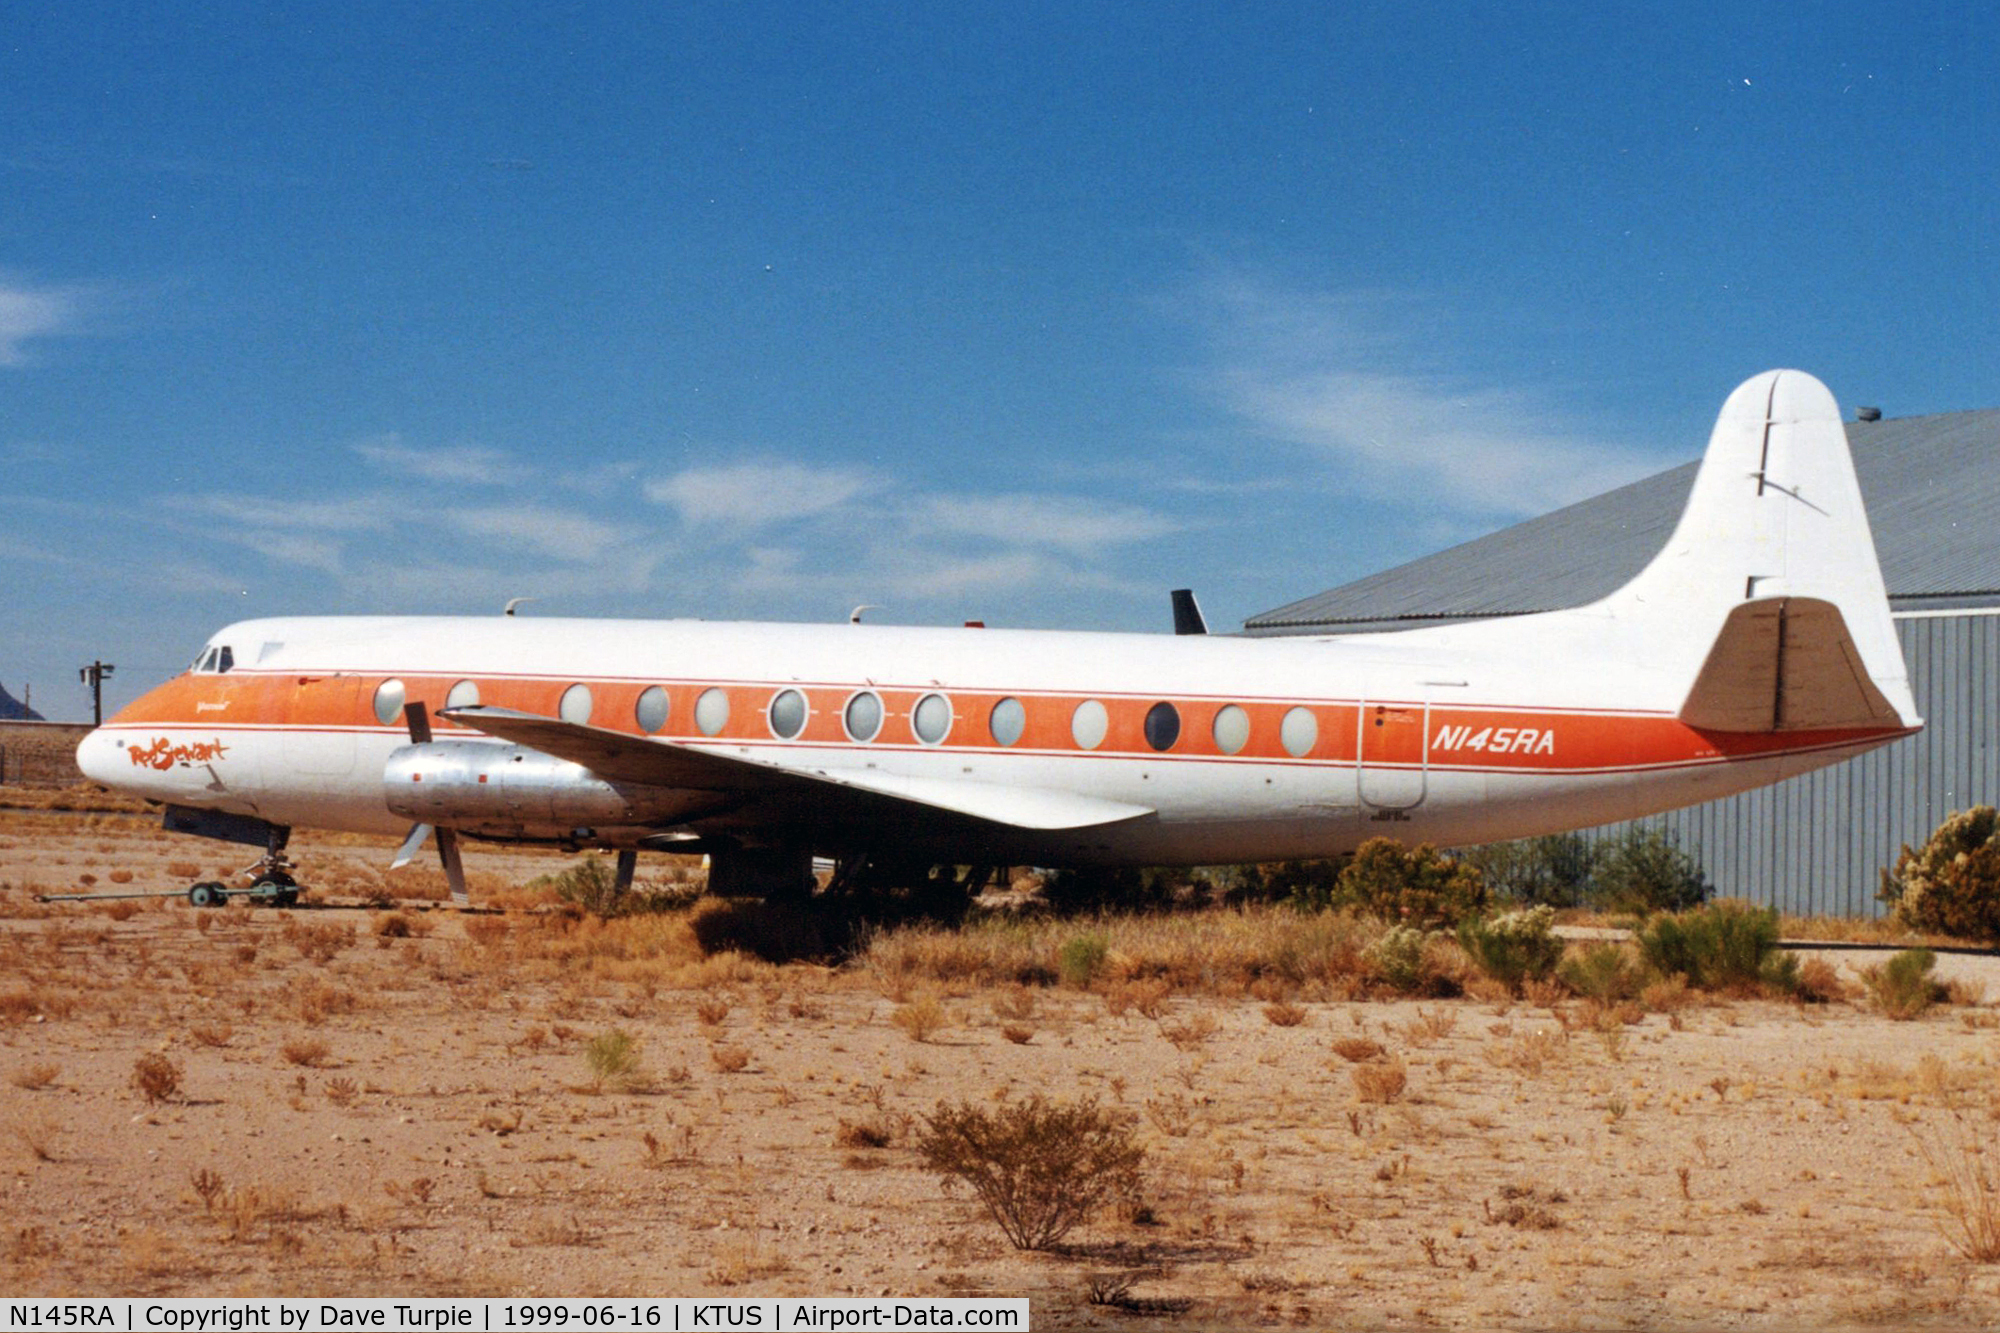 N145RA, 1959 Vickers Viscount 814 C/N 341, Rod Stewart's ride for a while. Operated by Go Air. The was one of many Viscounts parked at KTUS in the late 1990s. Originally registerd as D-ANIP. Reported broken up in 2002.